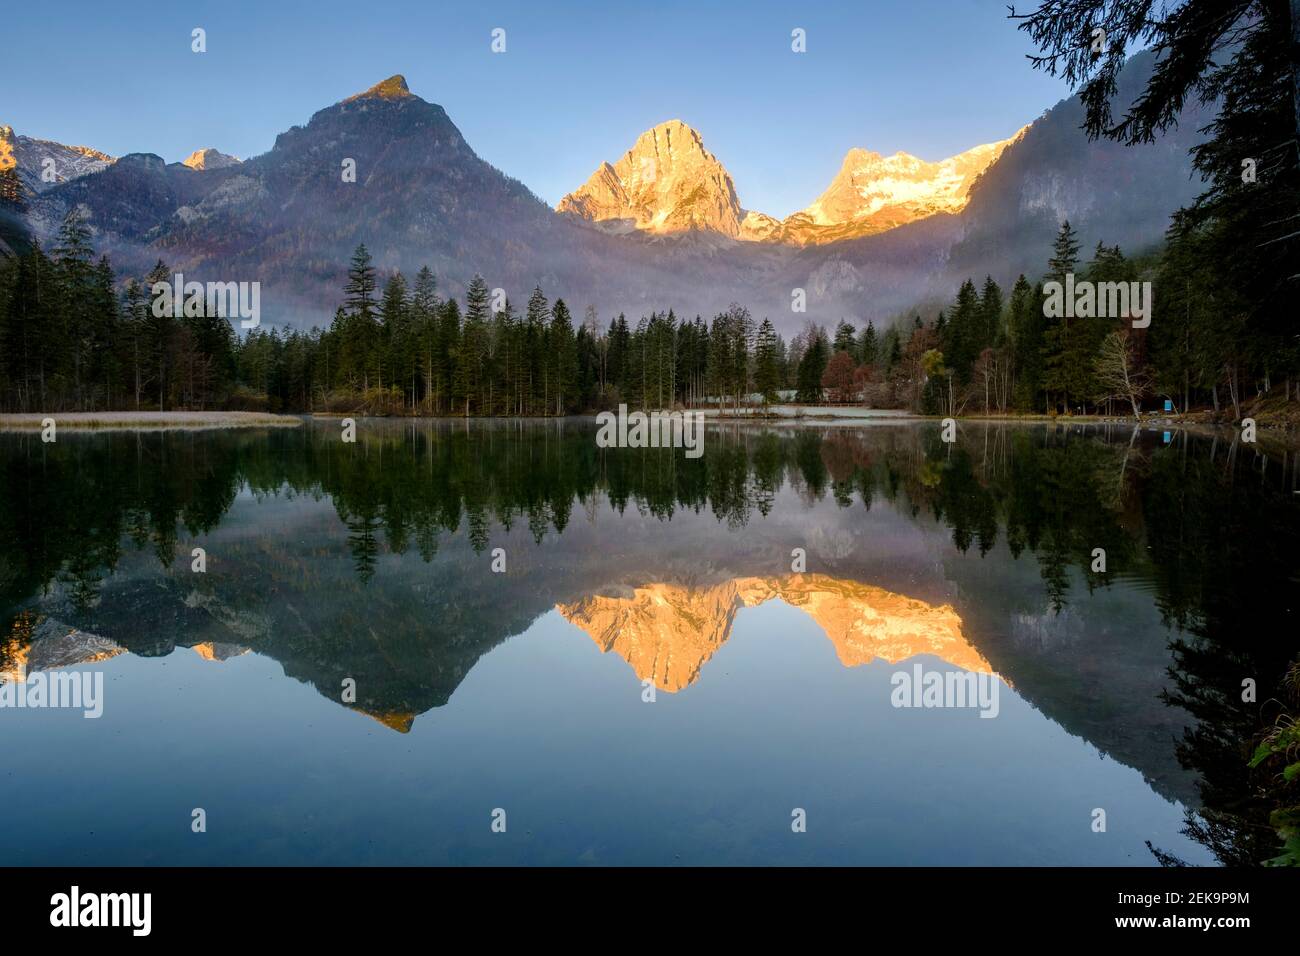 Schiederweiher lake at sunrise with Spitzmauer and Grosser Priel mountains in background Stock Photo